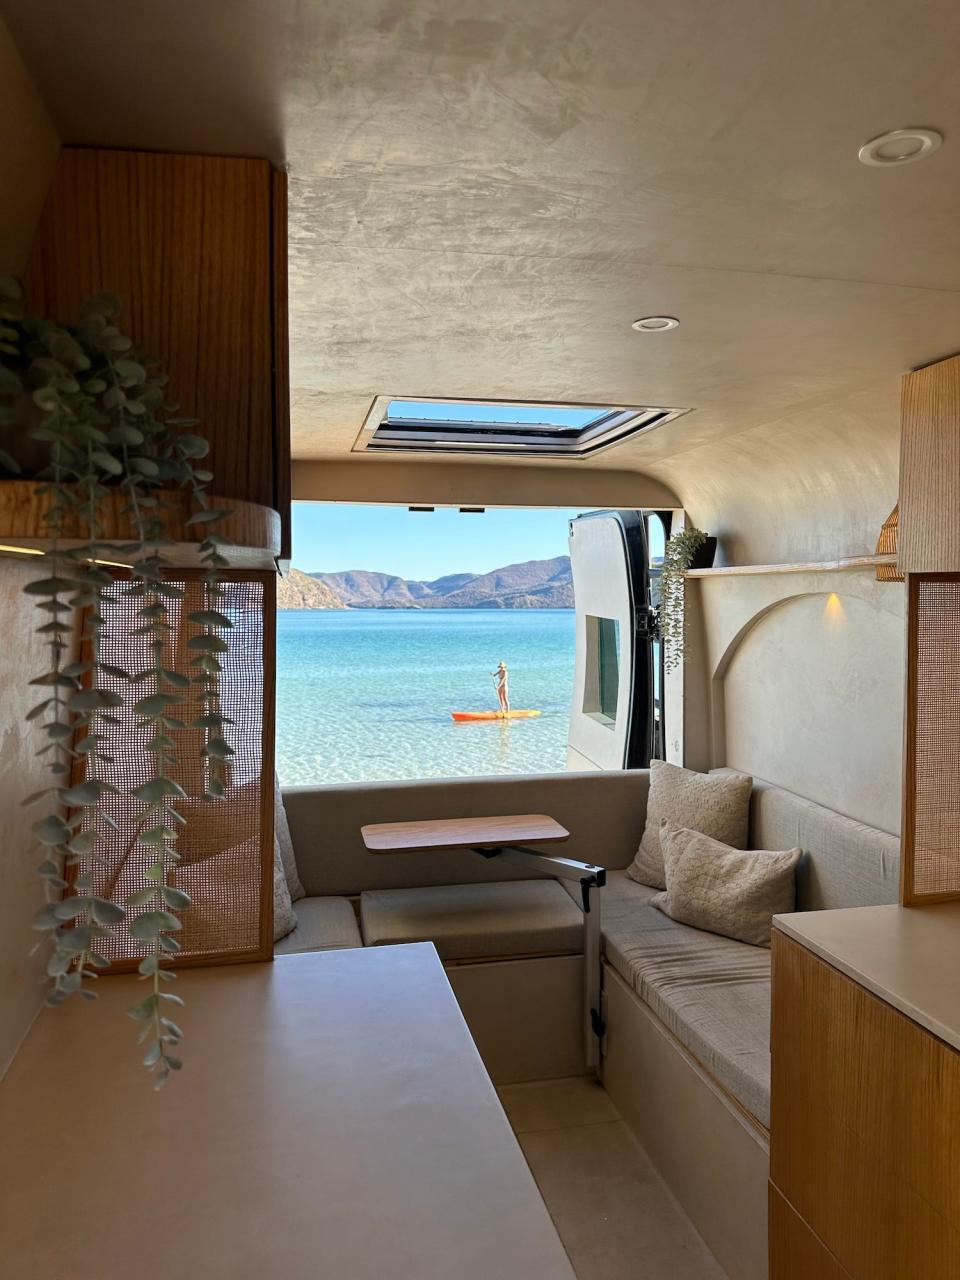 The interior of the couple's $127,000 van conversion. 